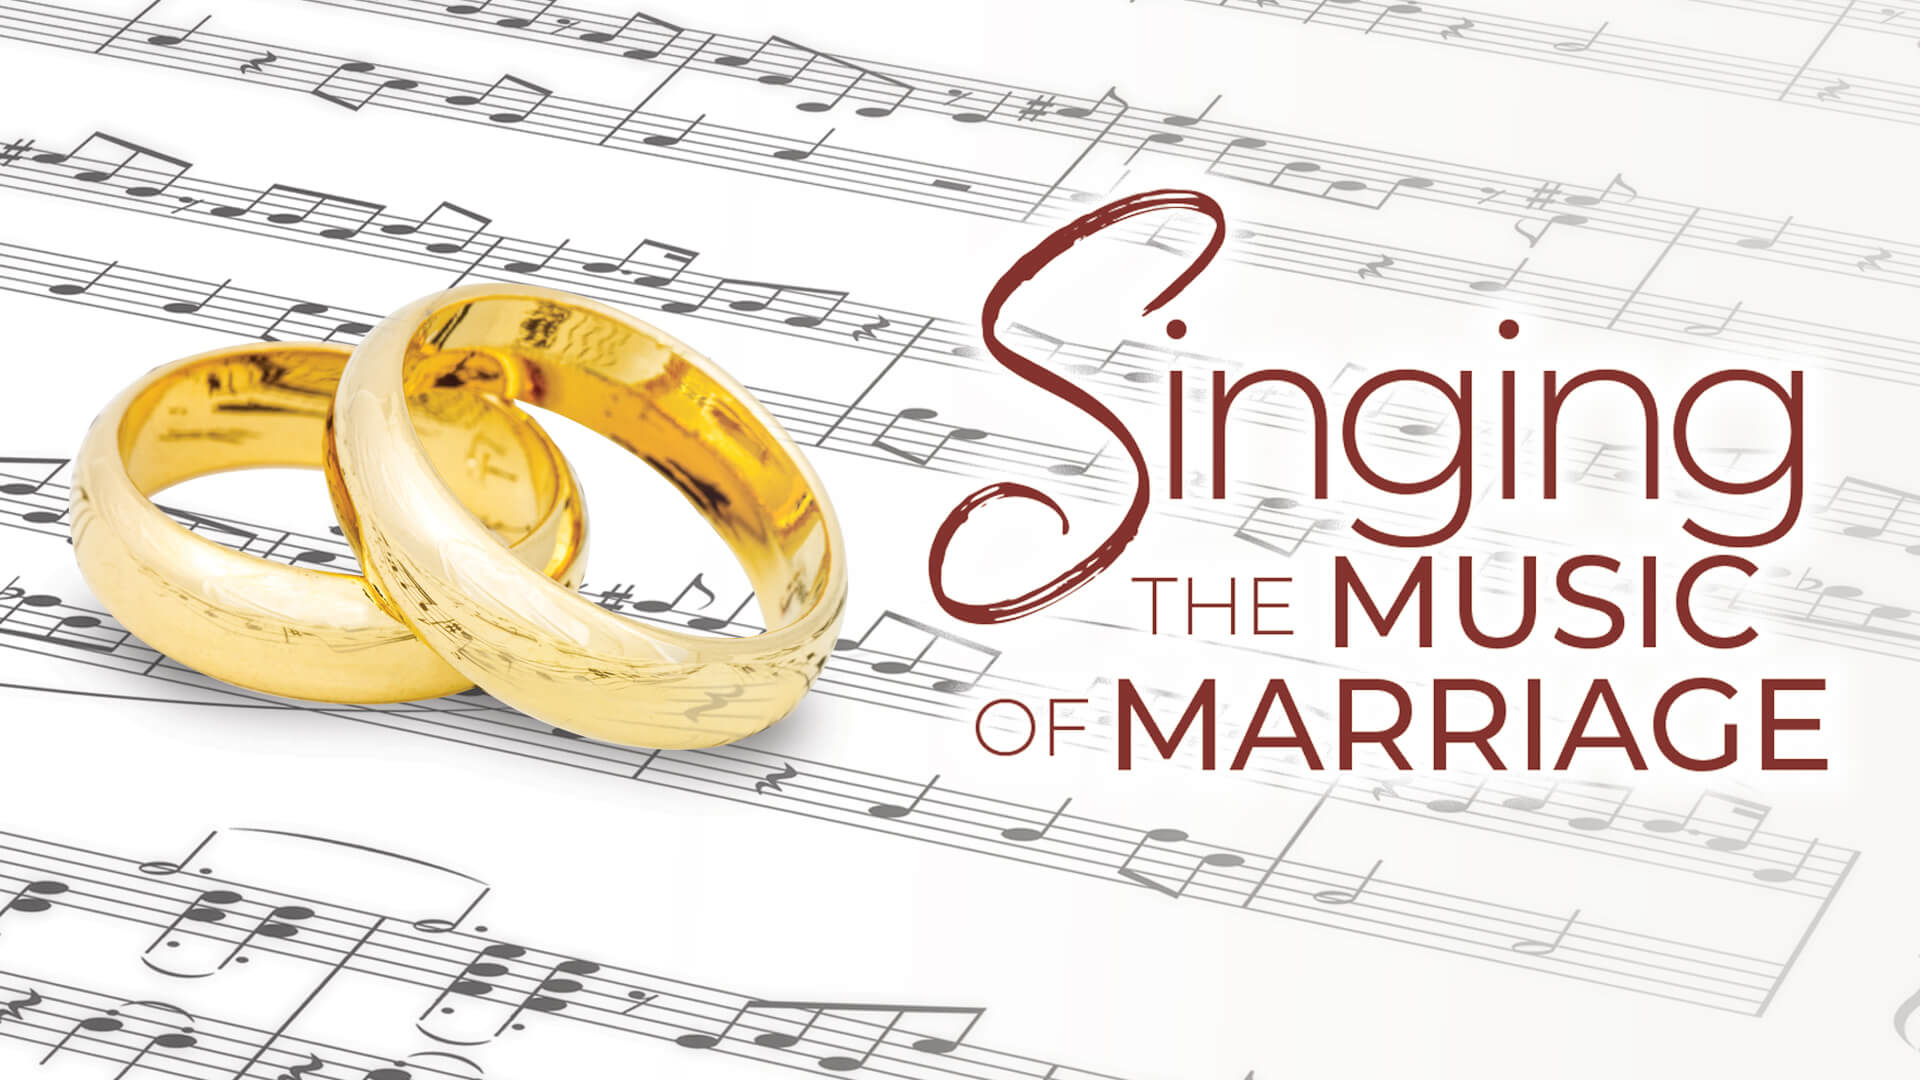 Singing the Music of Marriage 1920x1080